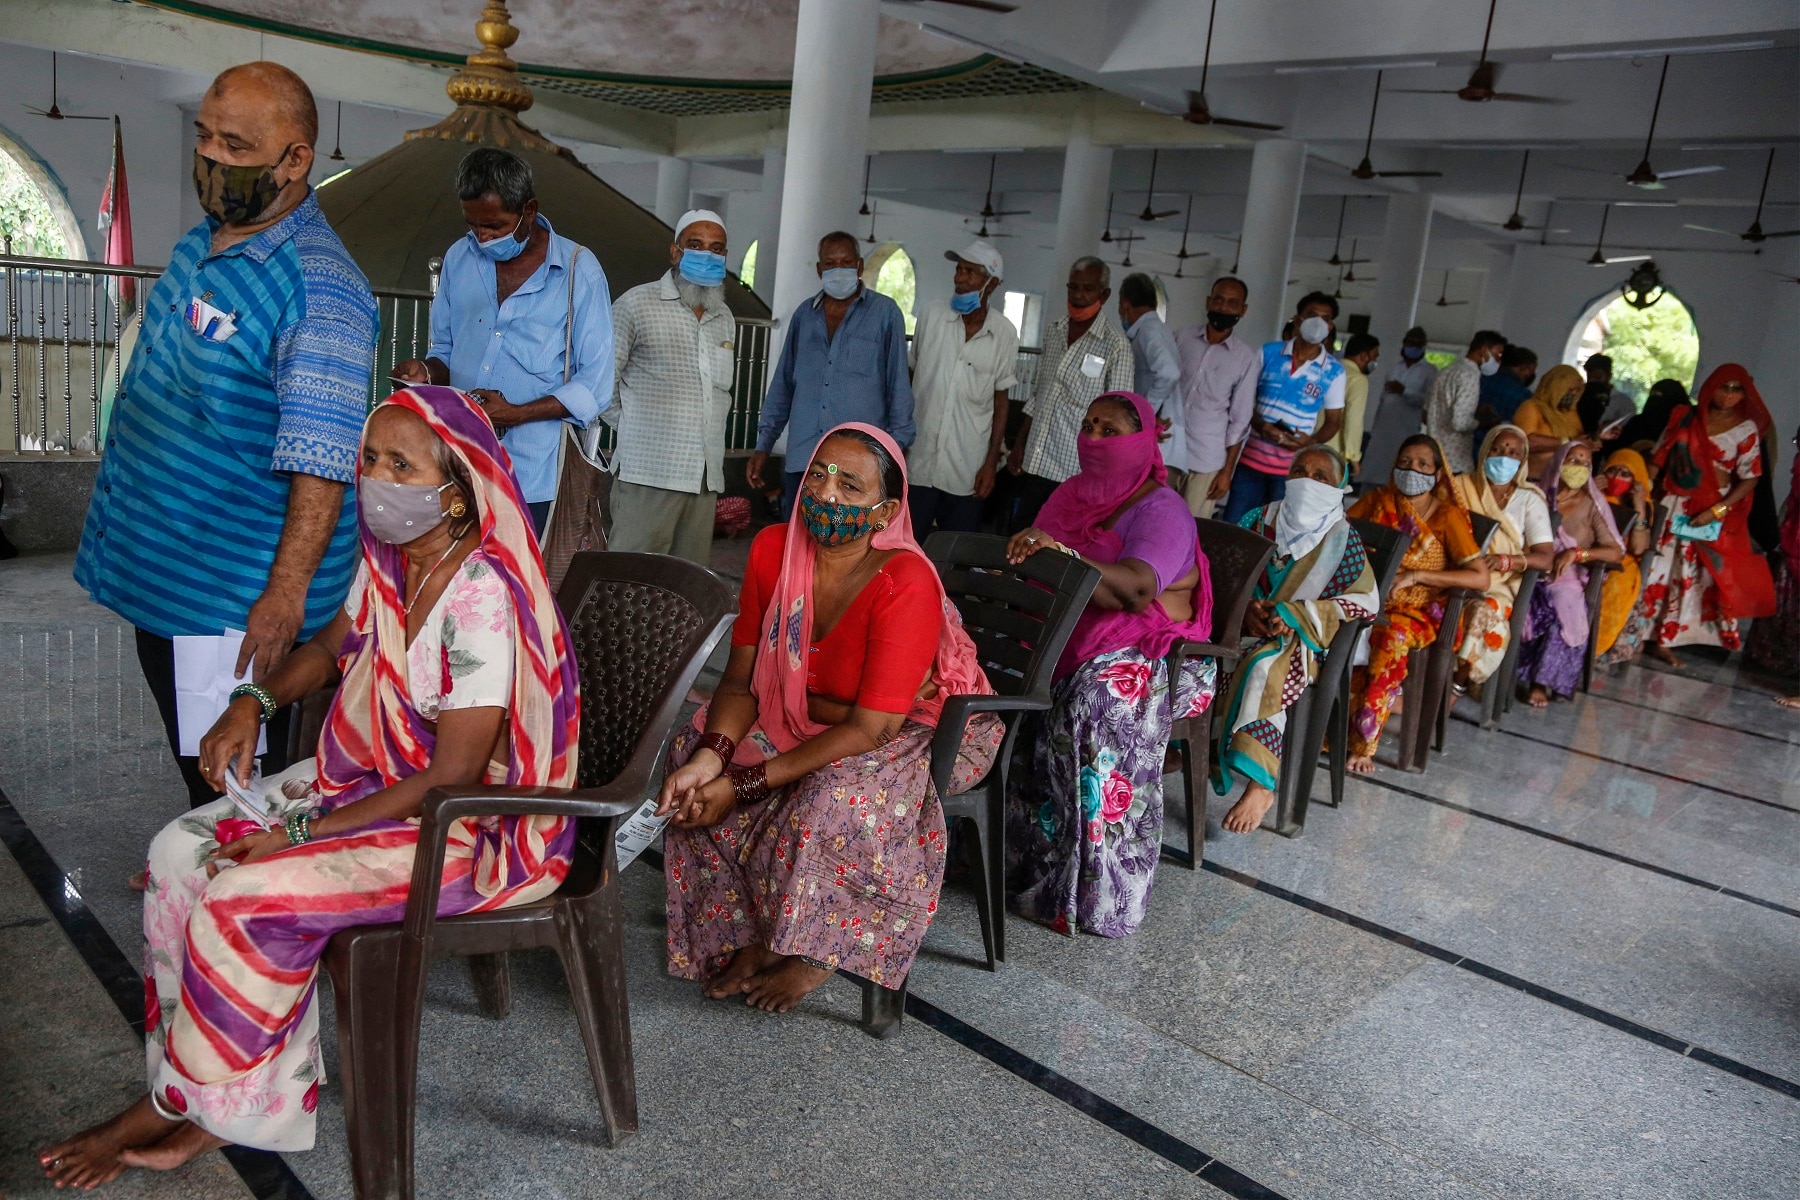 People line up to register themselves to get a dose of Covishield, Serum Institute of India's version of the AstraZeneca COVID-19 vaccine.